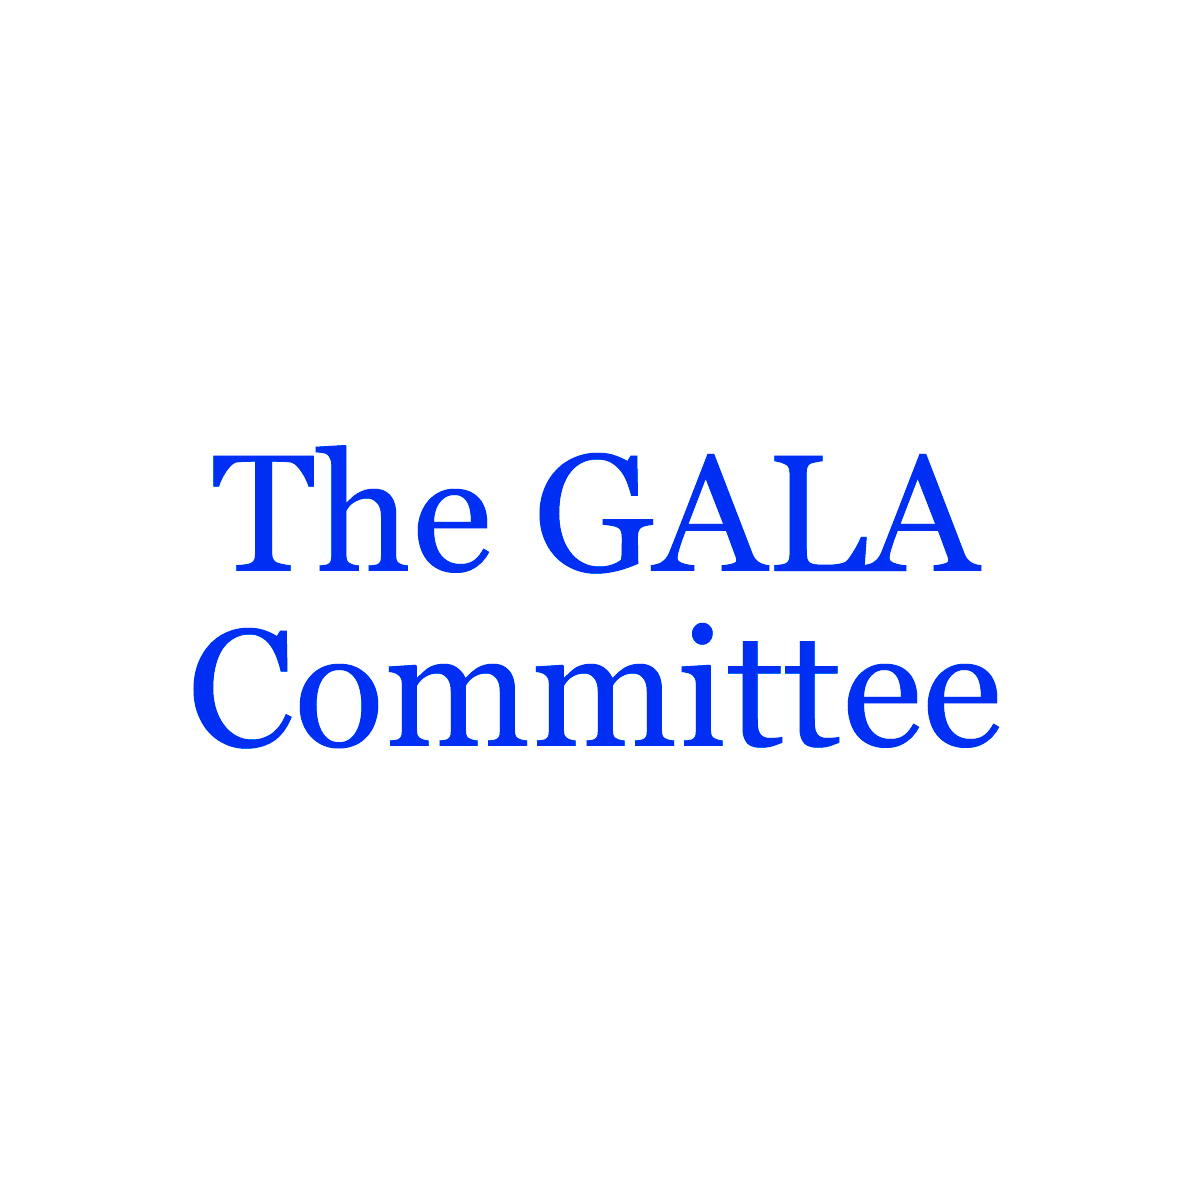 The GALA Committee Client Image